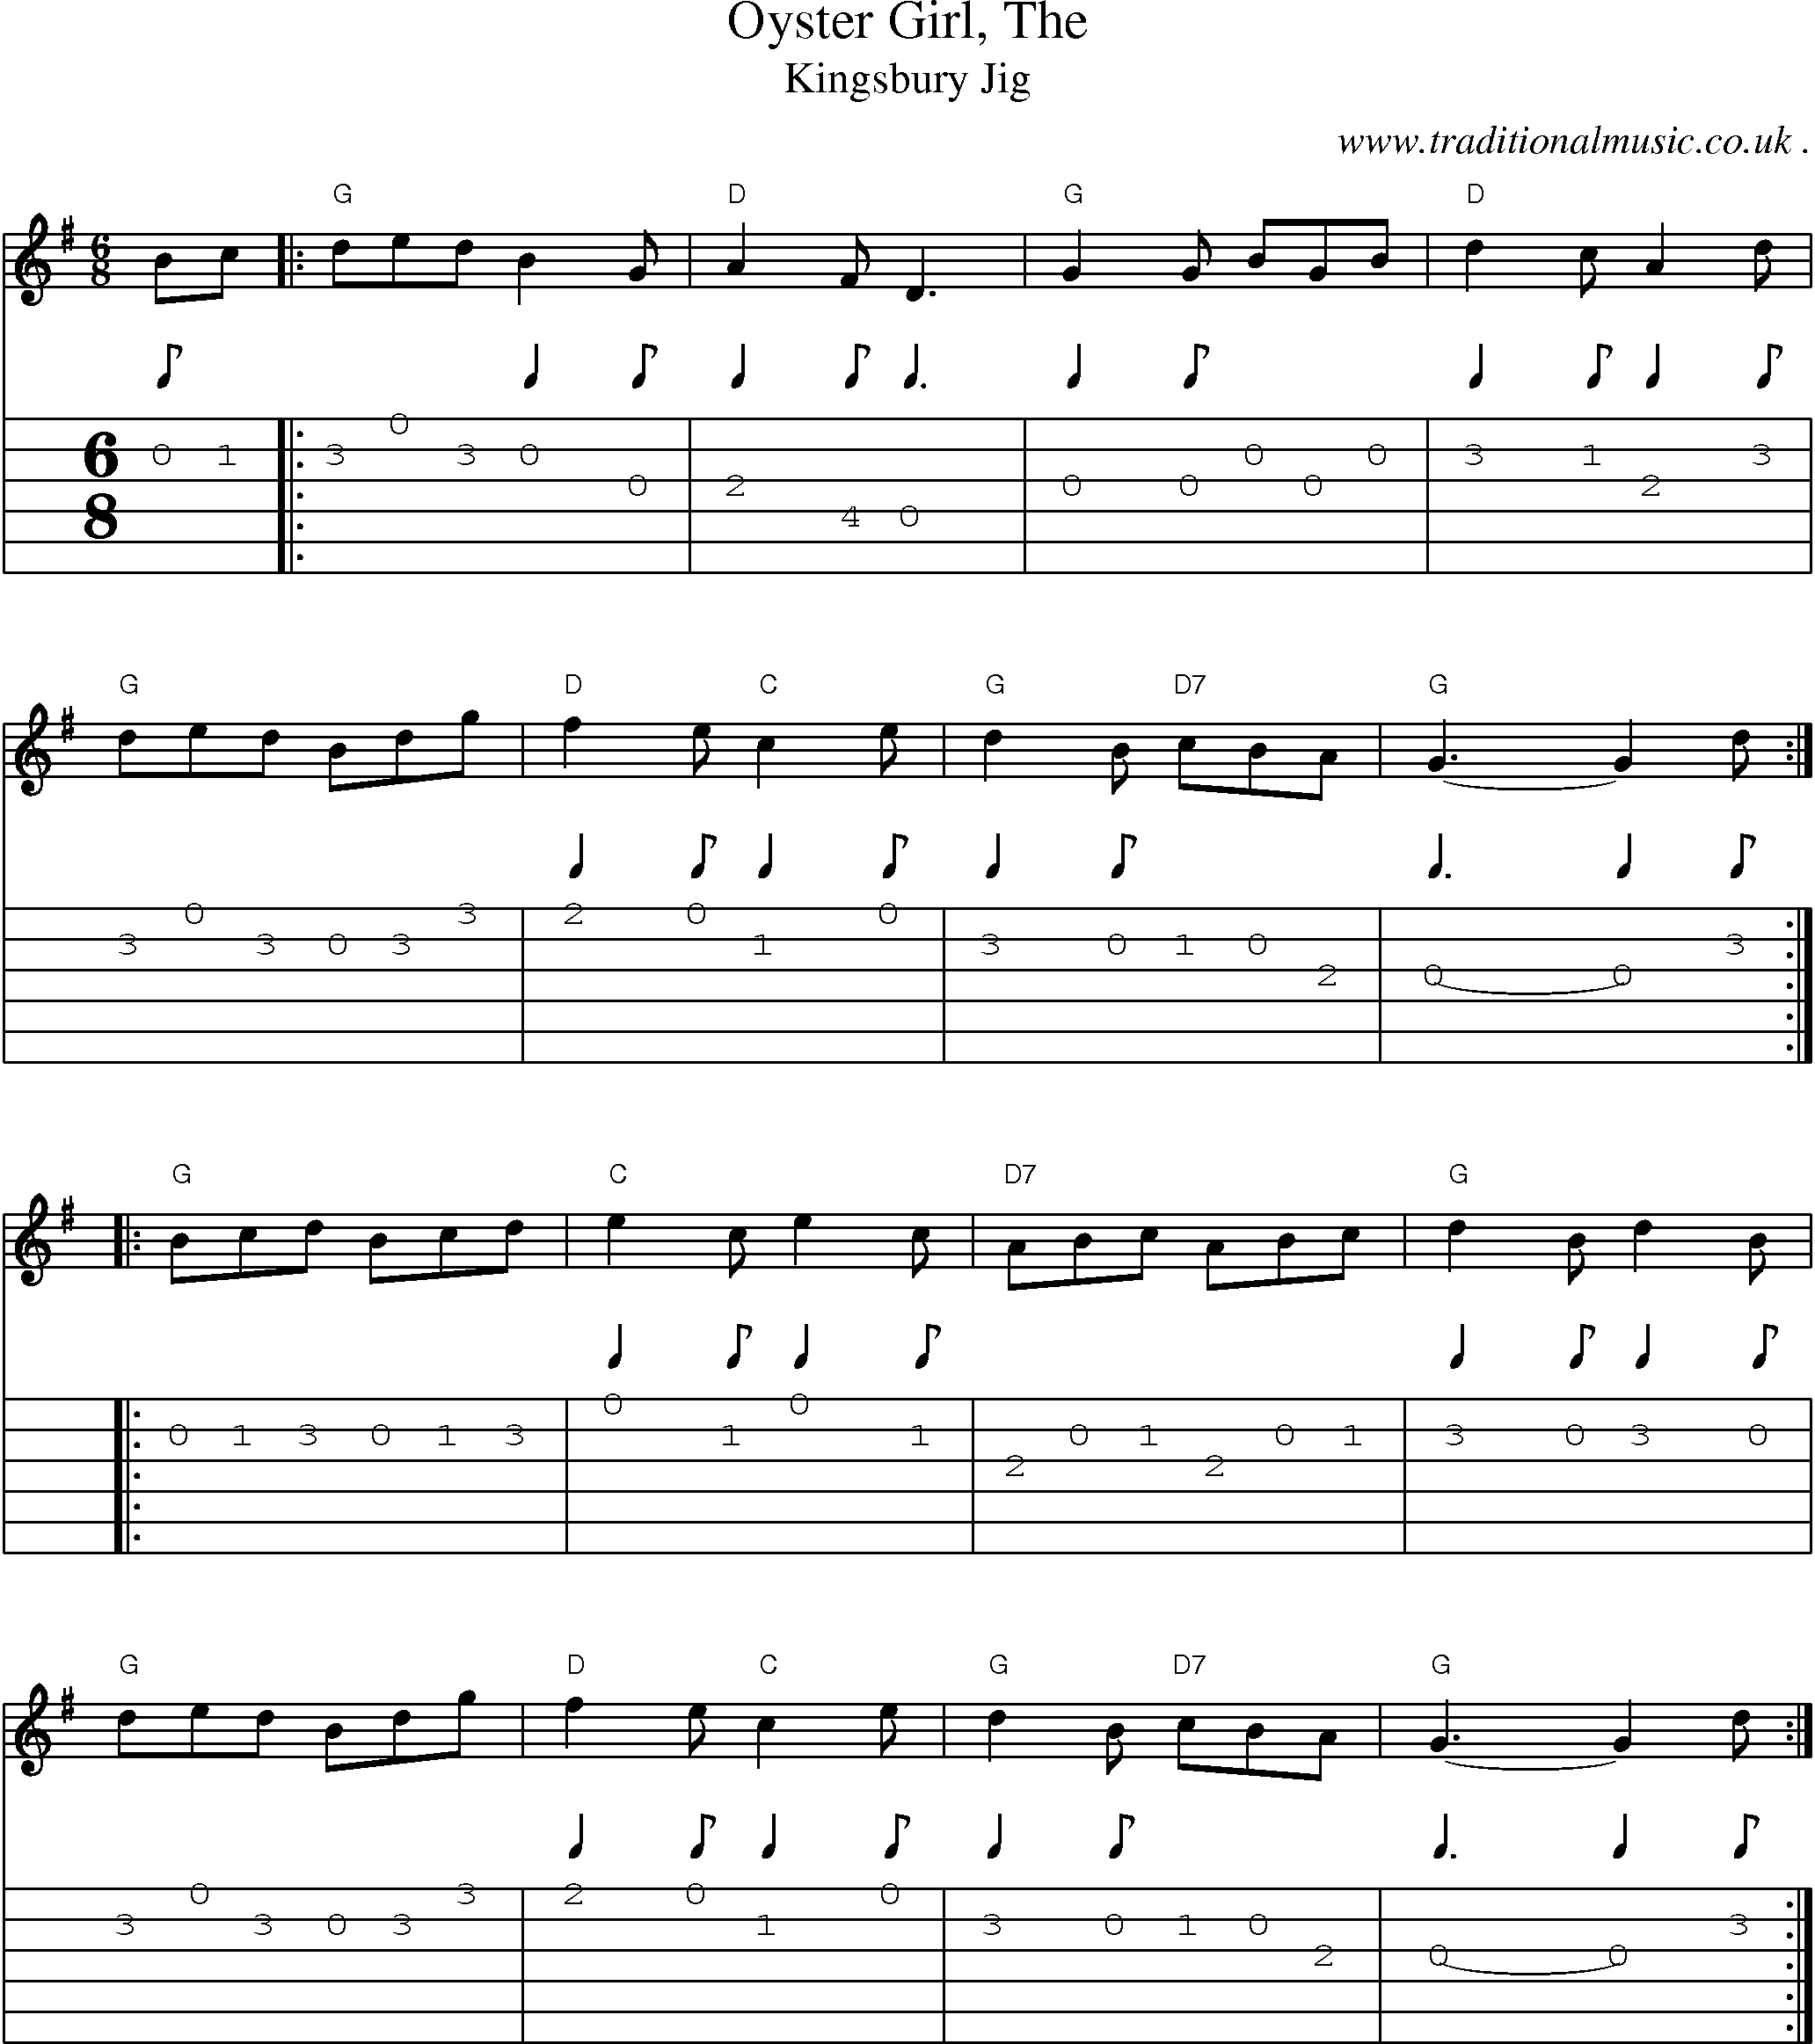 Music Score and Guitar Tabs for Oyster Girl The